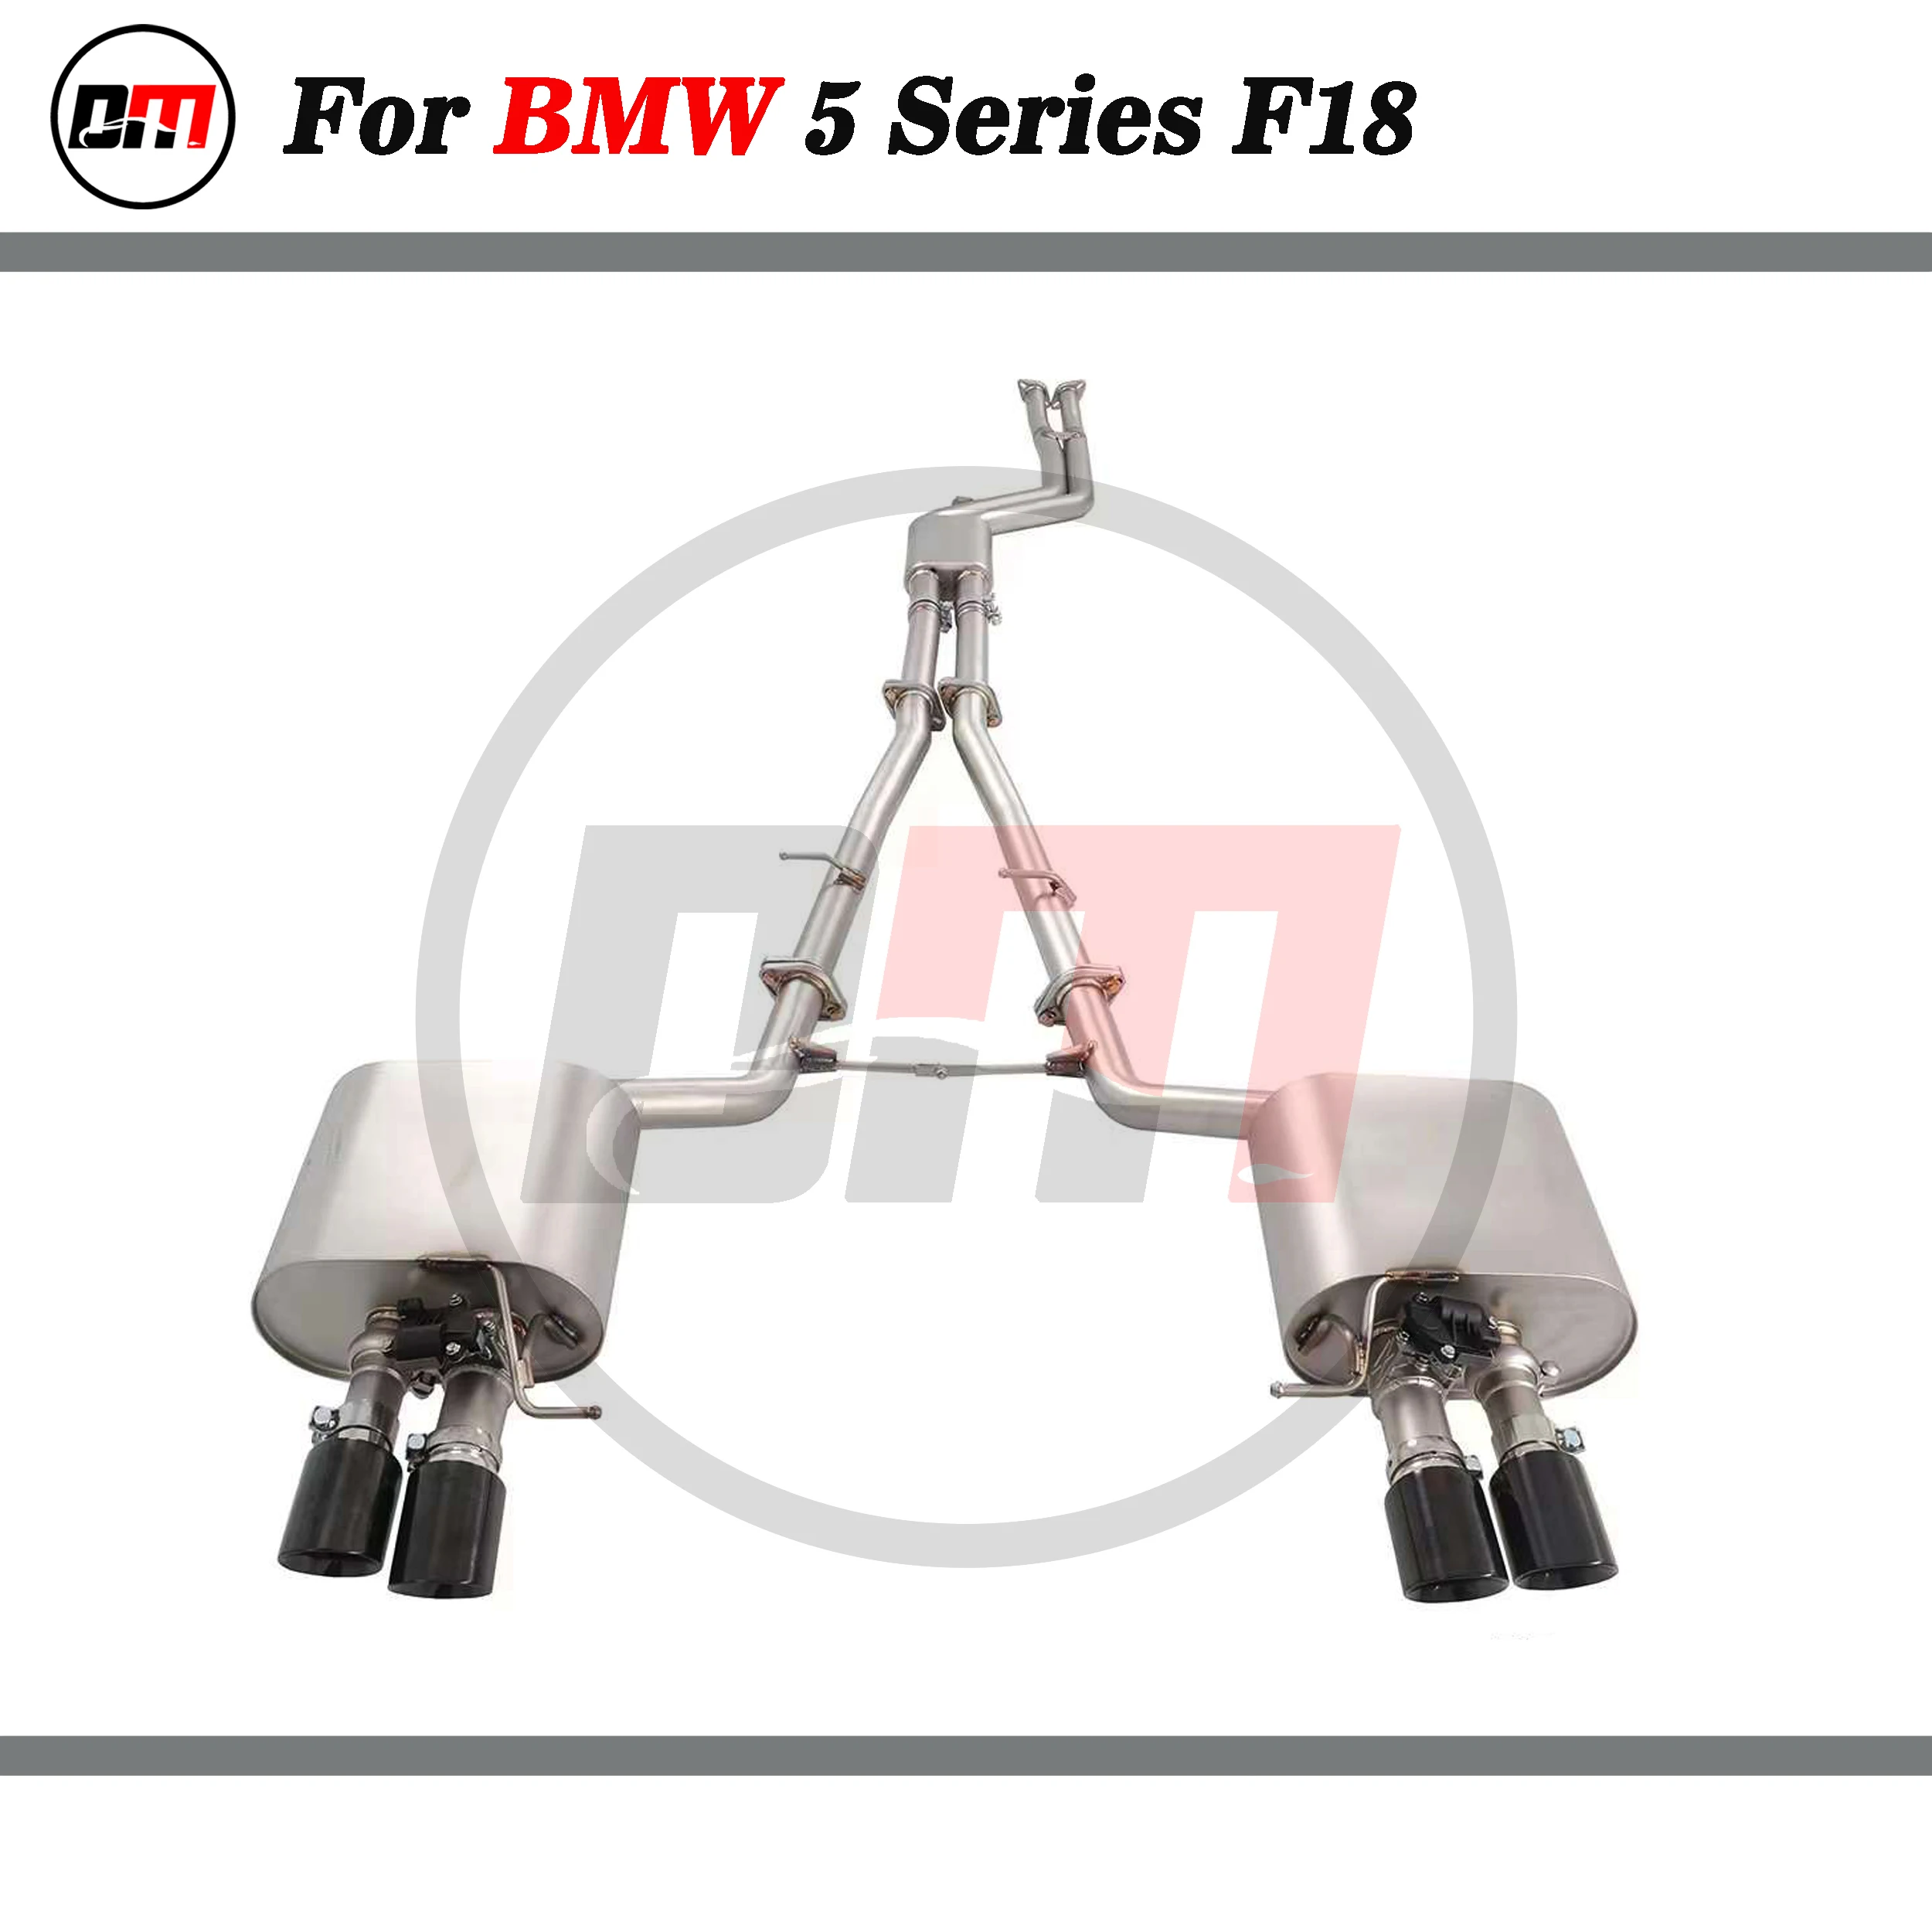 

DM exhaust stainless steel catback exhaust system for BMW 5 series f18 with valve and tips muffler exhaust pipe performance